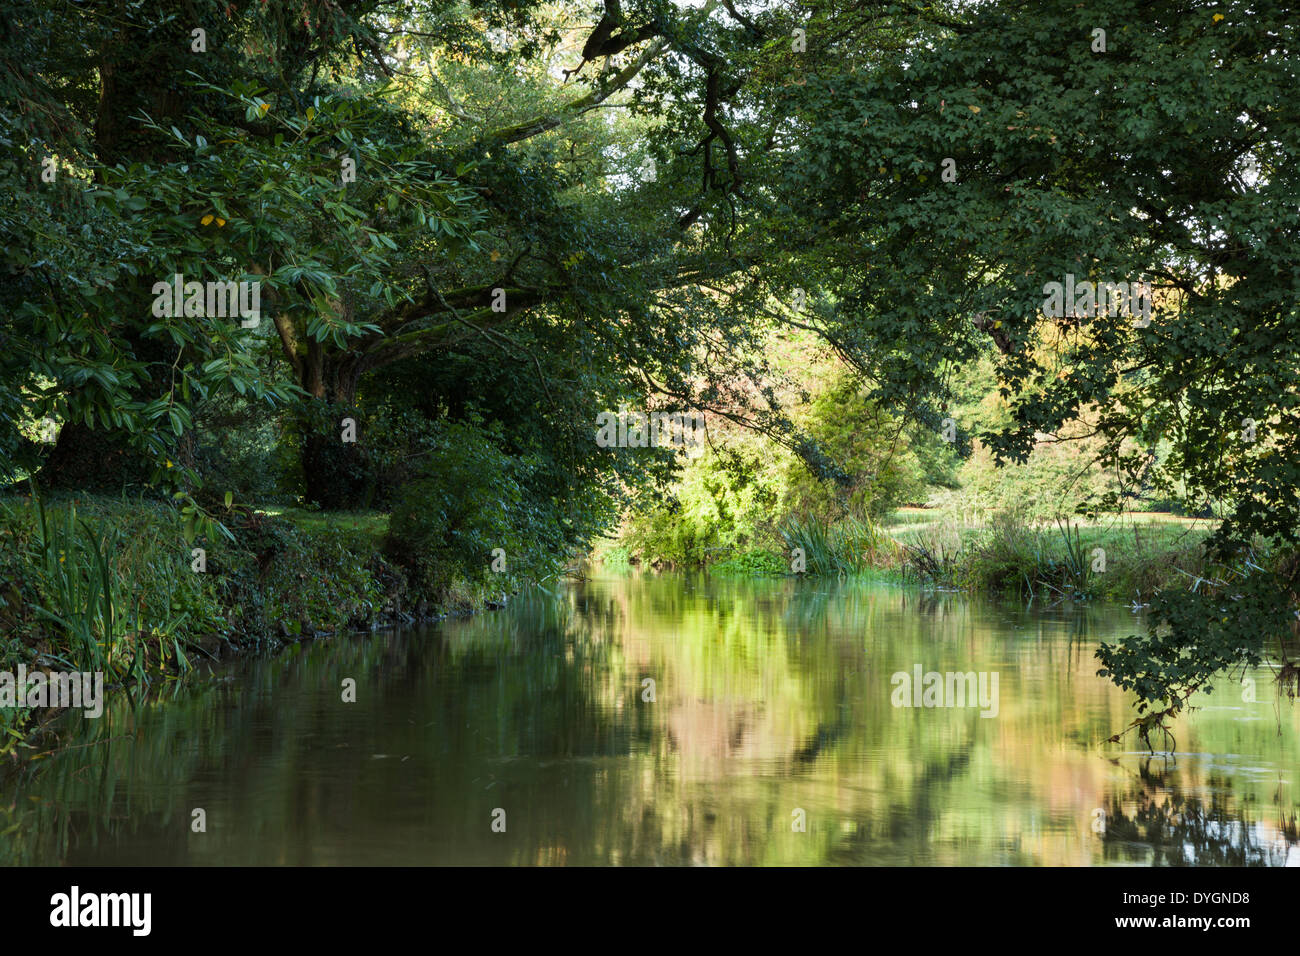 Branches overhang the calm waters of the River Cherwell on the edge of Rousham House gardens in Oxfordshire, England. Stock Photo